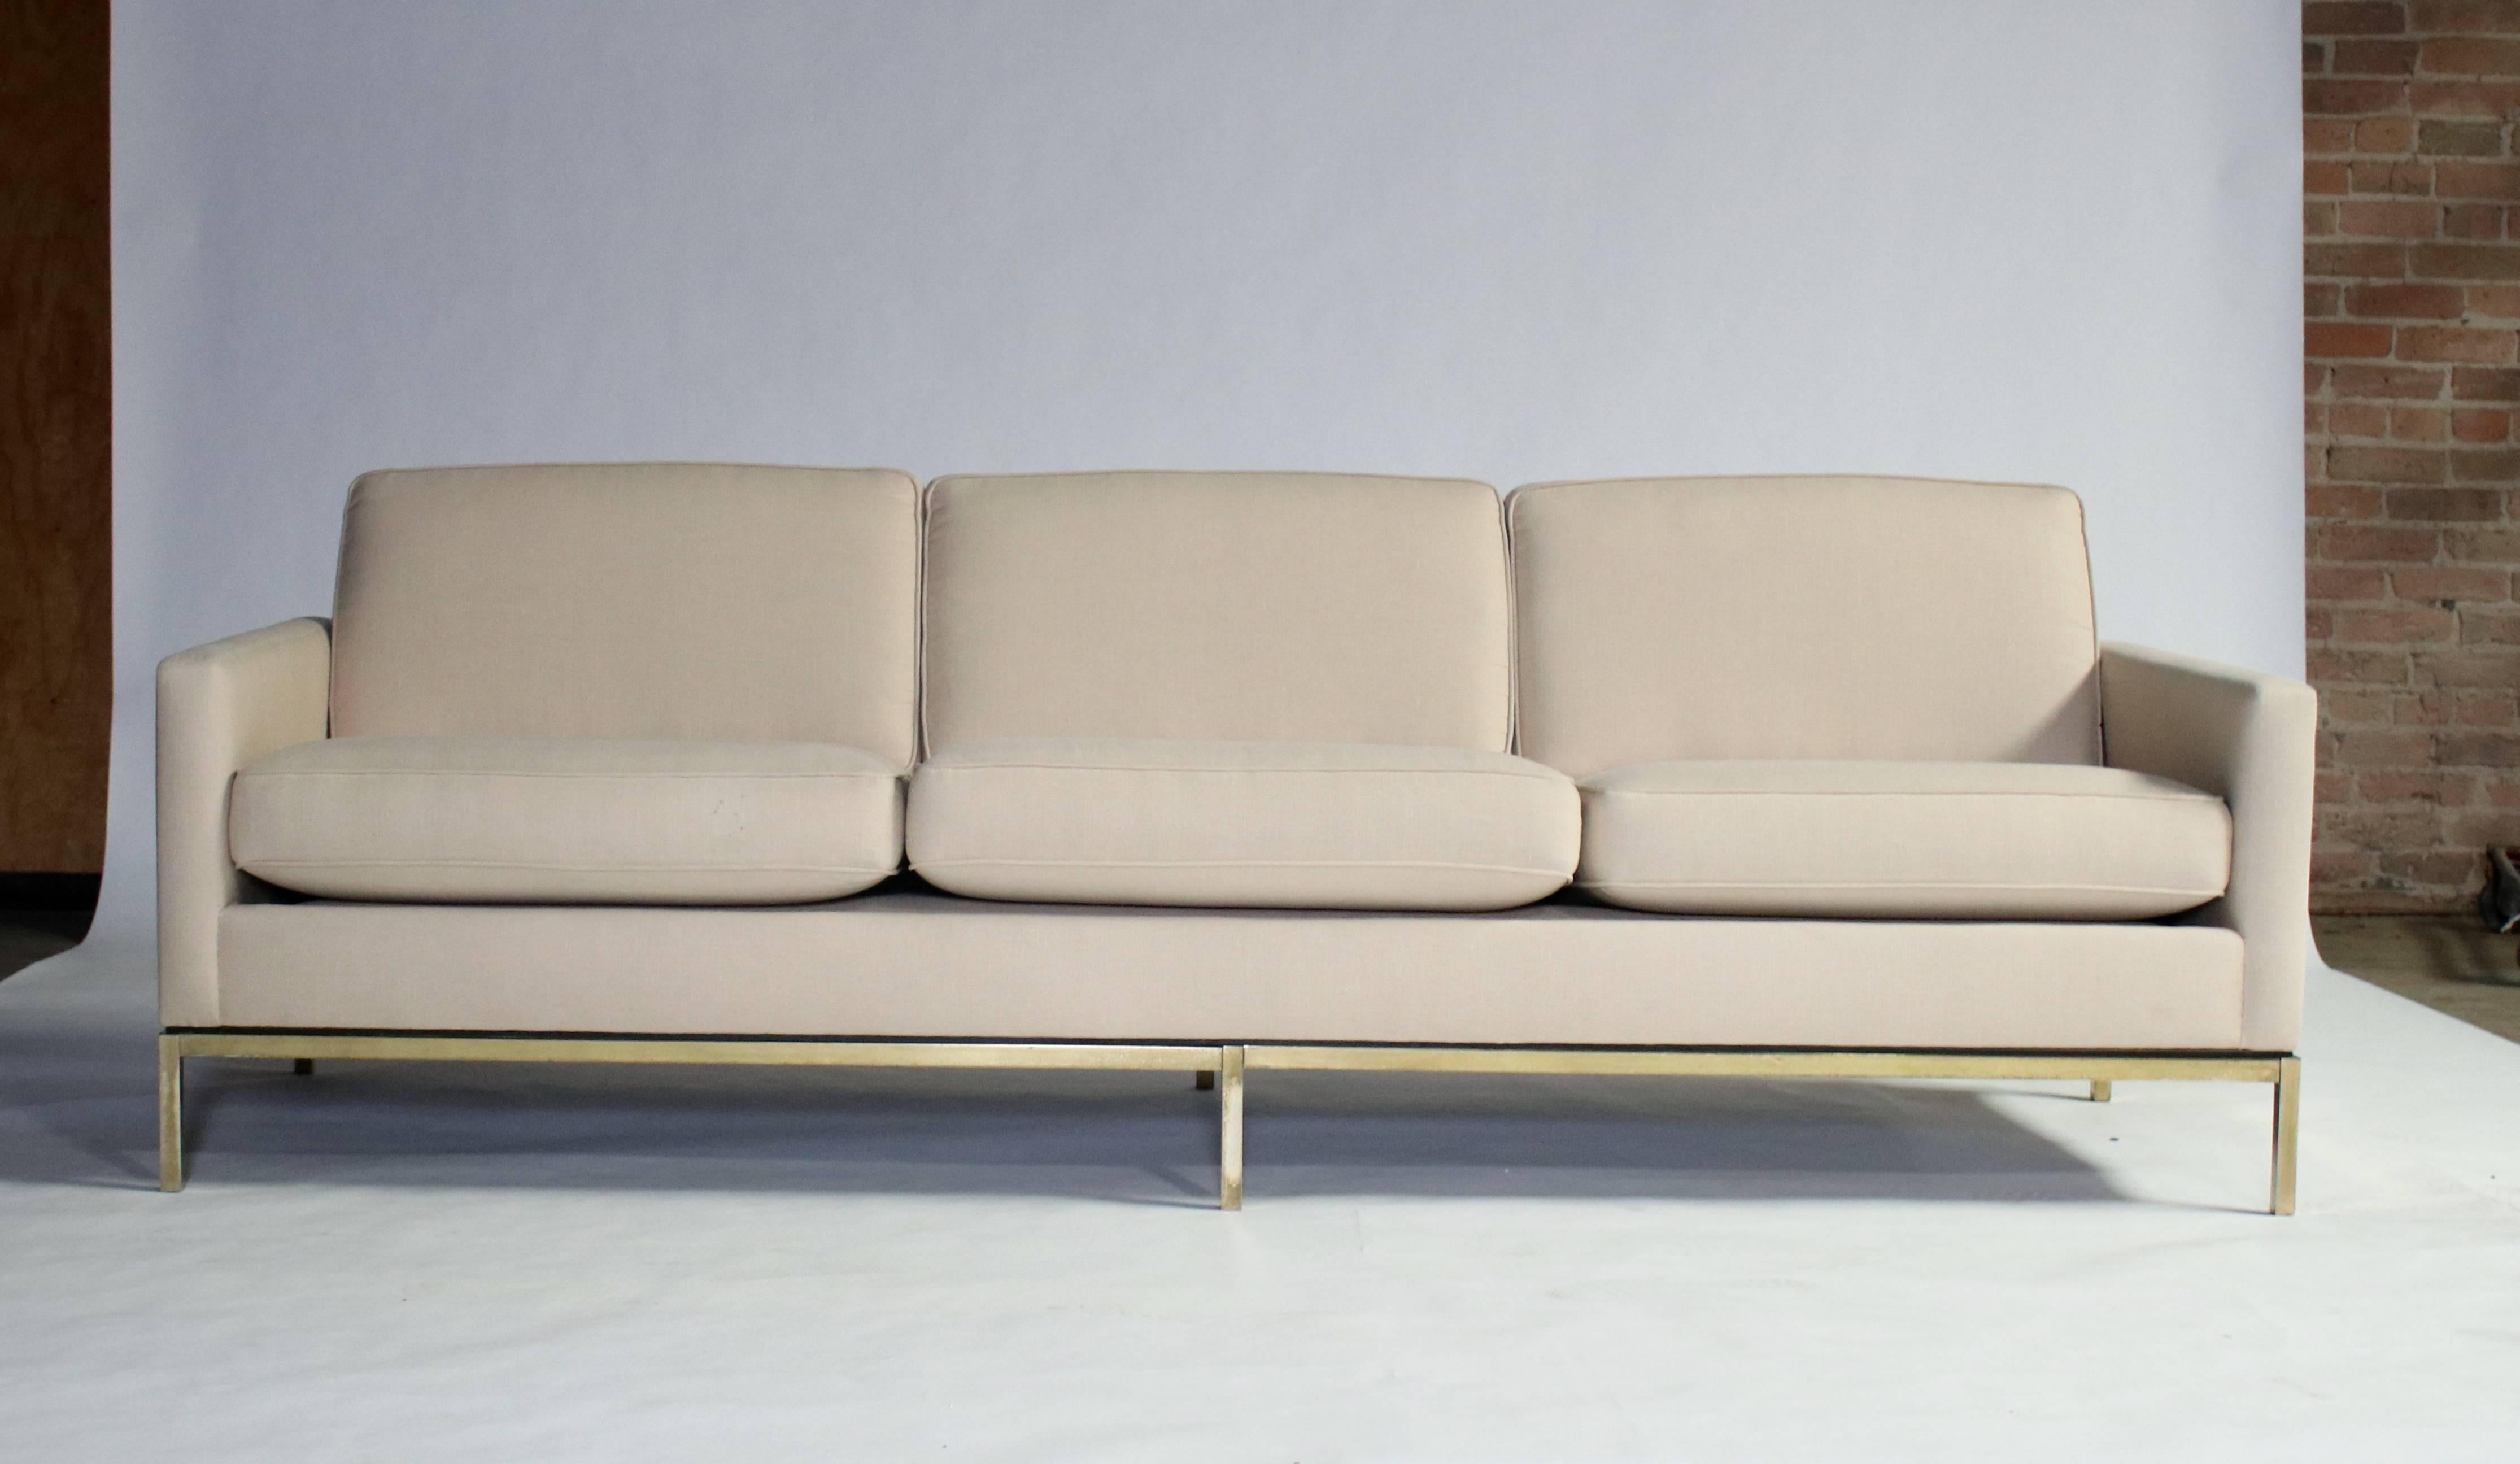 Three-seat sofa by Florence Knoll for Knoll Associates in cream color linen on a steel frame. Removable cushions. Gold tone metal with age appropriate patina that can polish to the chrome.